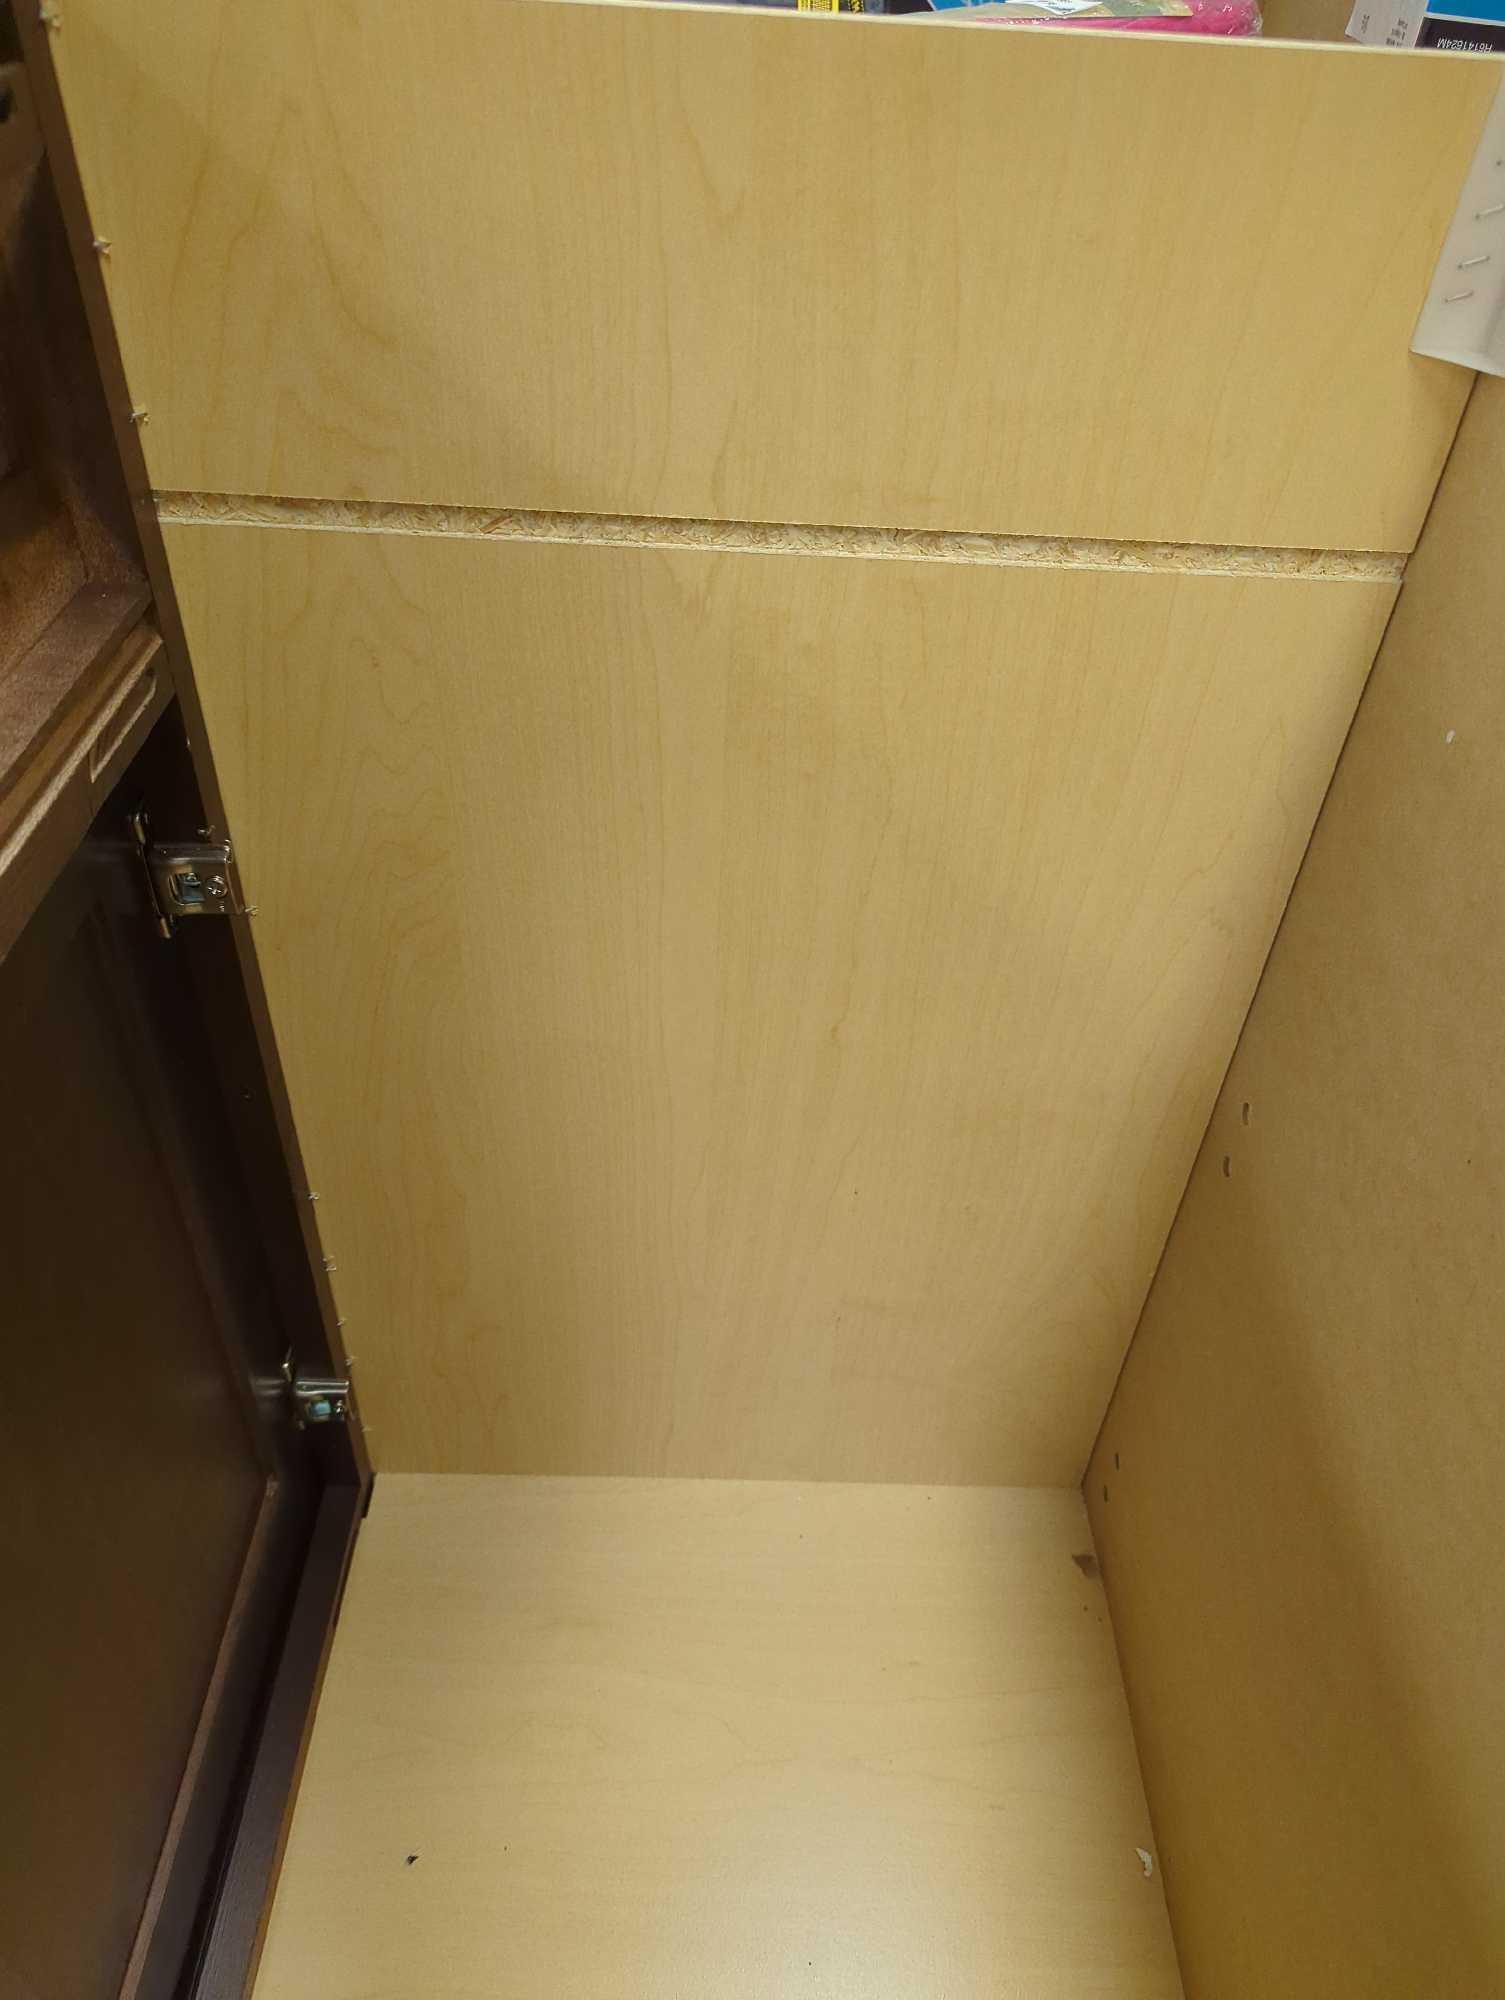 (Has Some Mi or Damage) Home Decoraters Collection (Paint Chips under Right Cabinet Door) Sedgewood